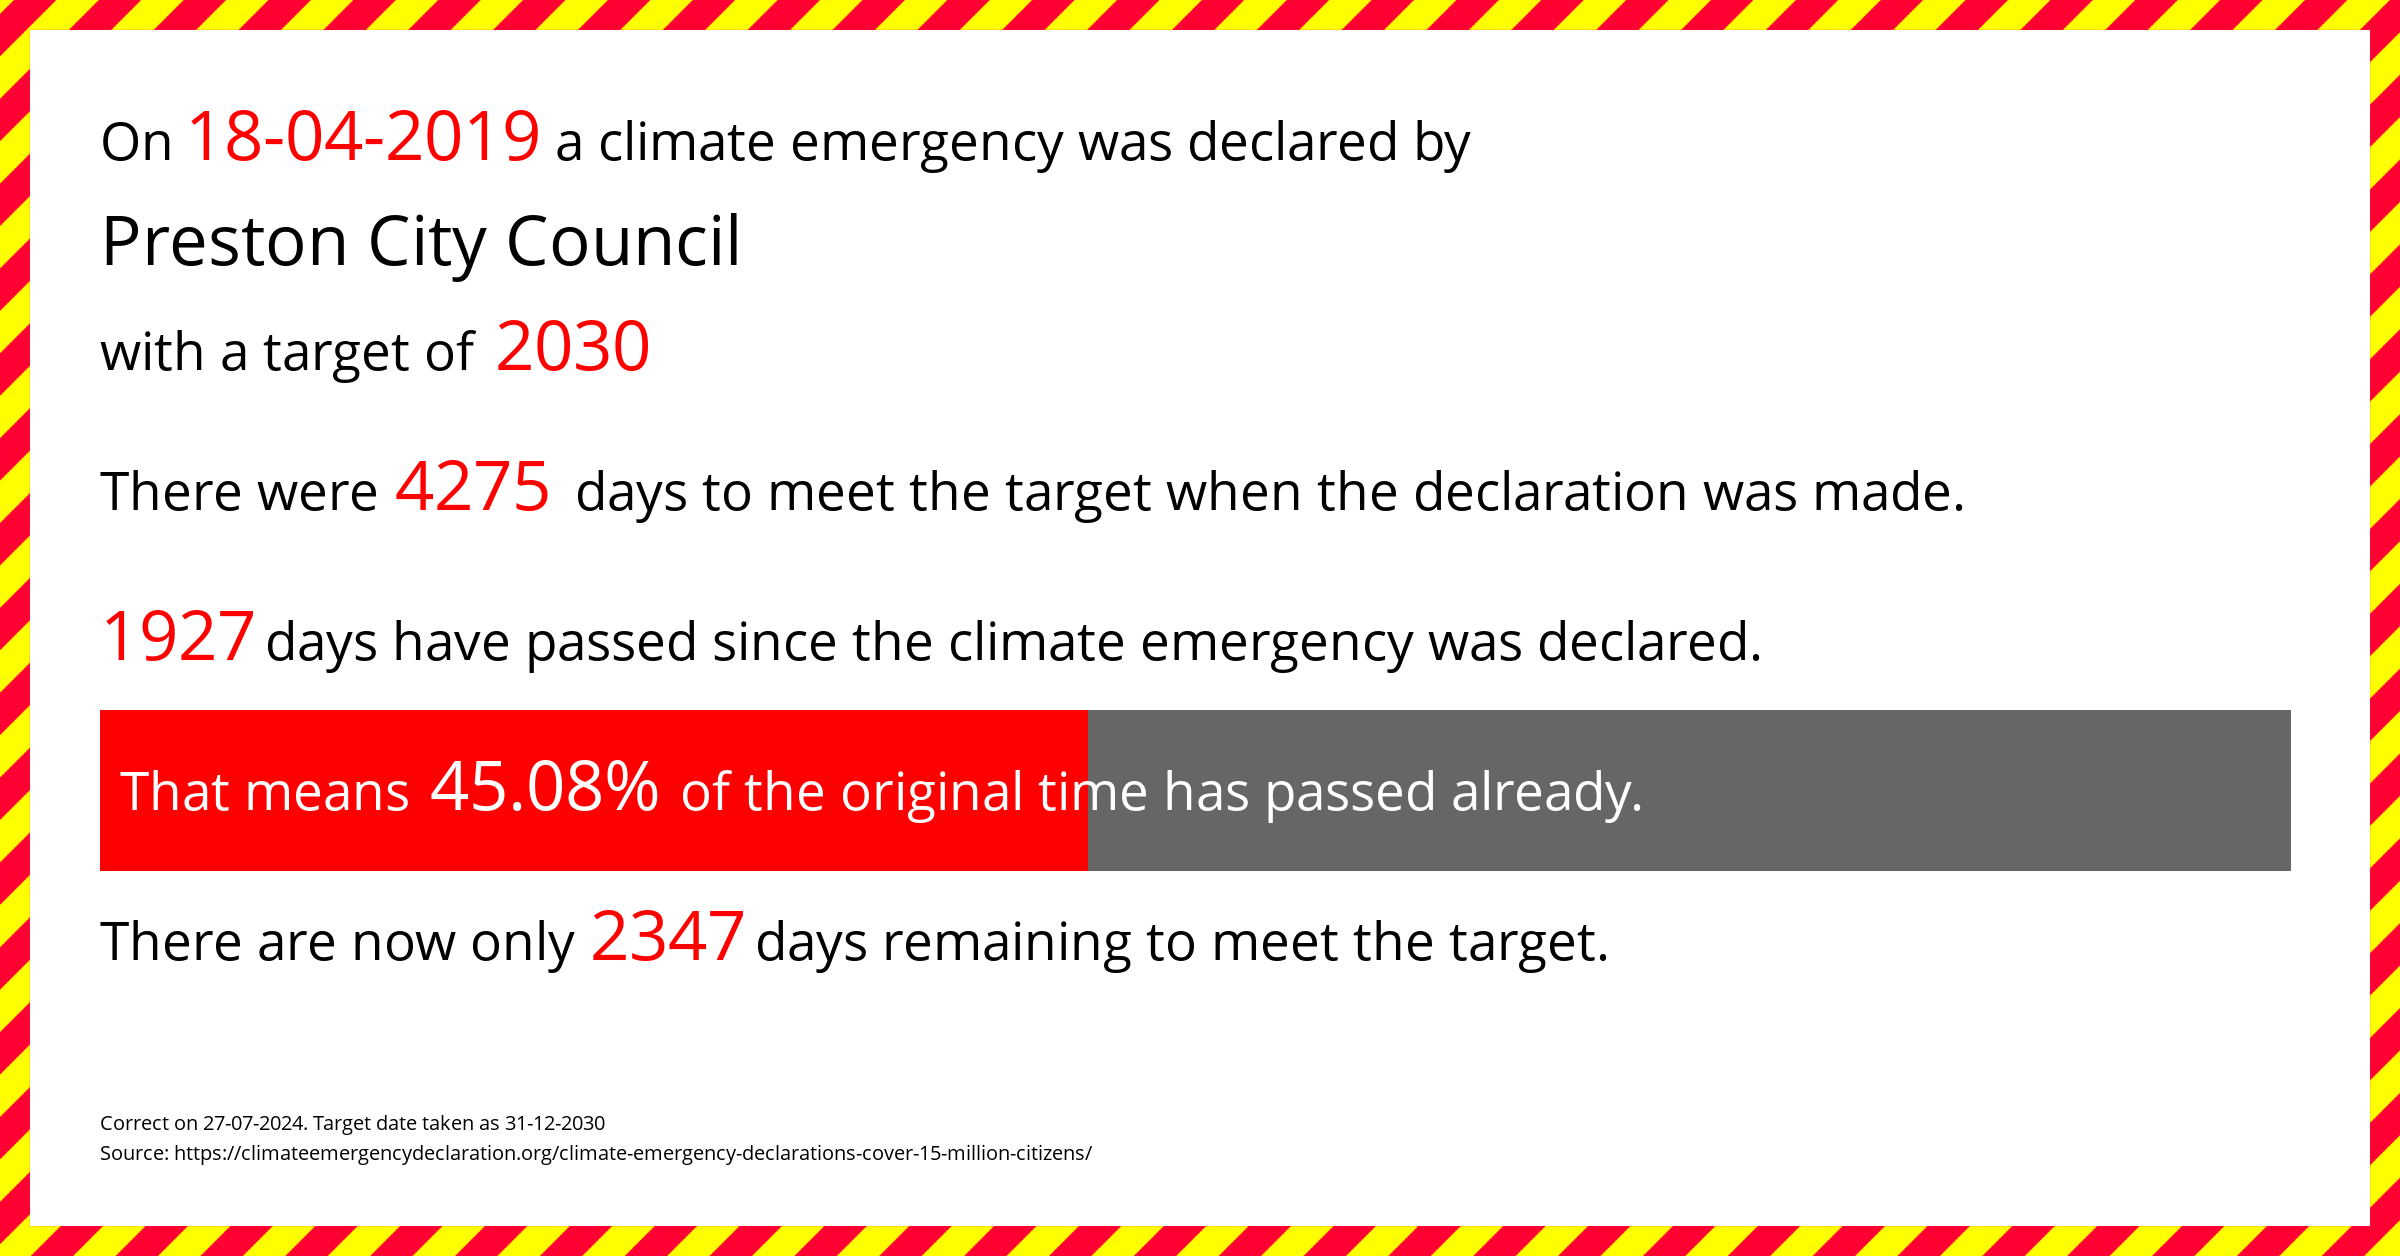 Preston City Council declared a Climate emergency on Thursday 18th April 2019, with a target of 2030.